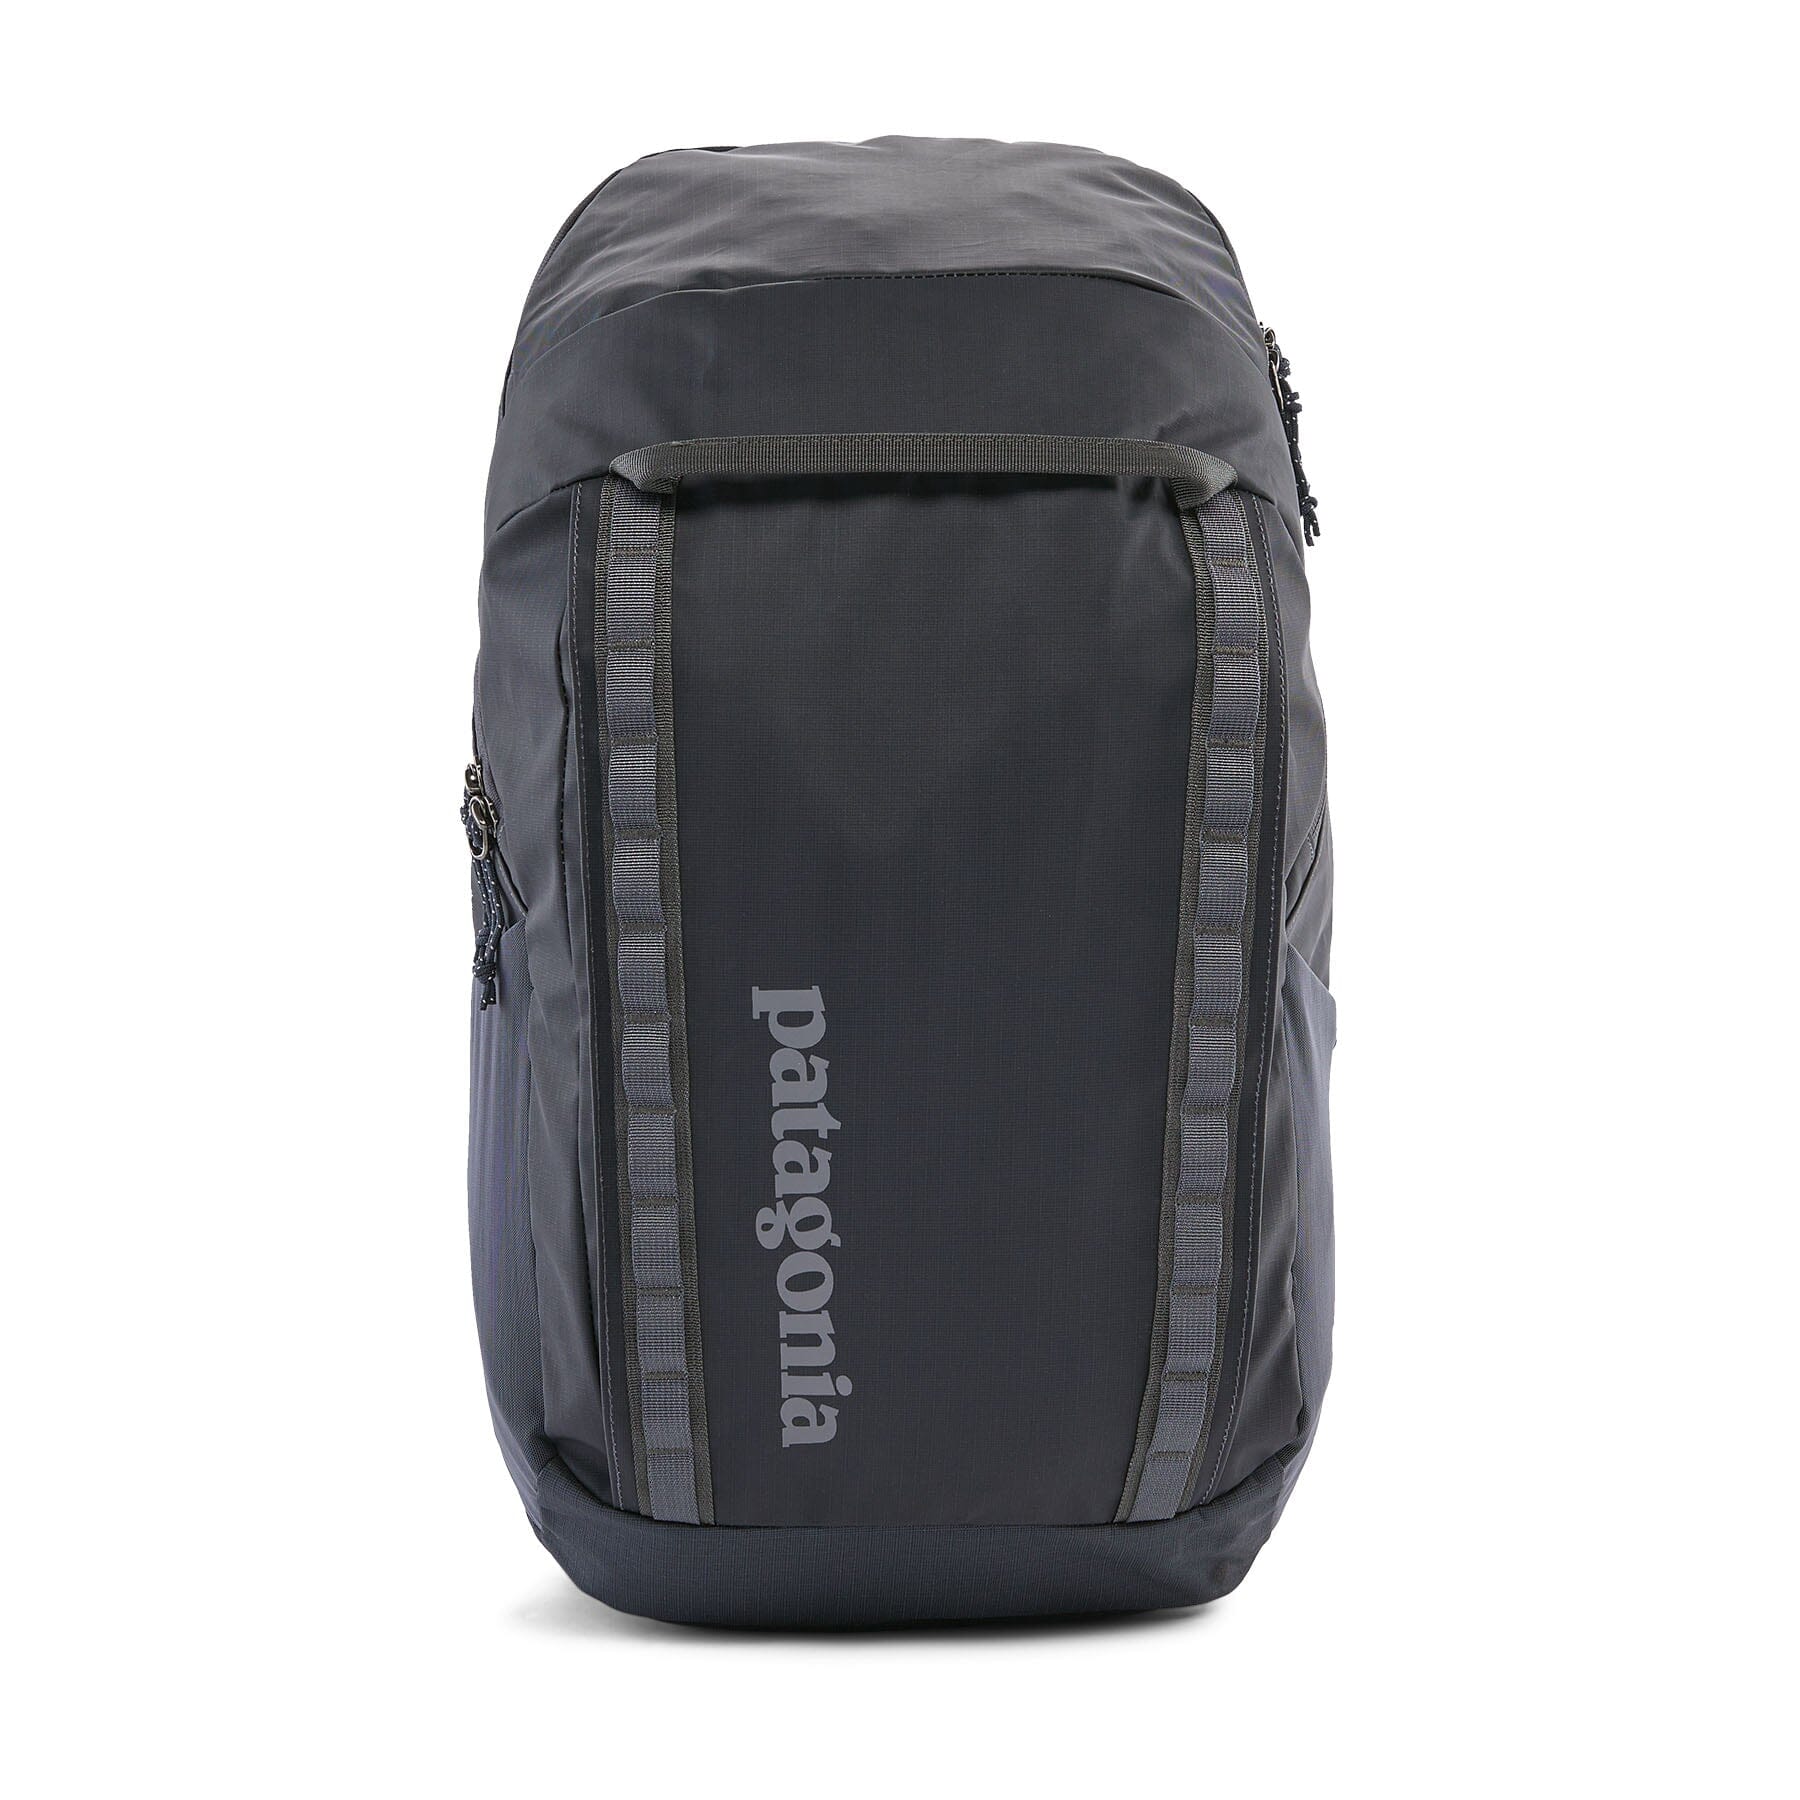 Patagonia Black Hole Pack 32L - 100% Recycled Polyester Smolder Blue